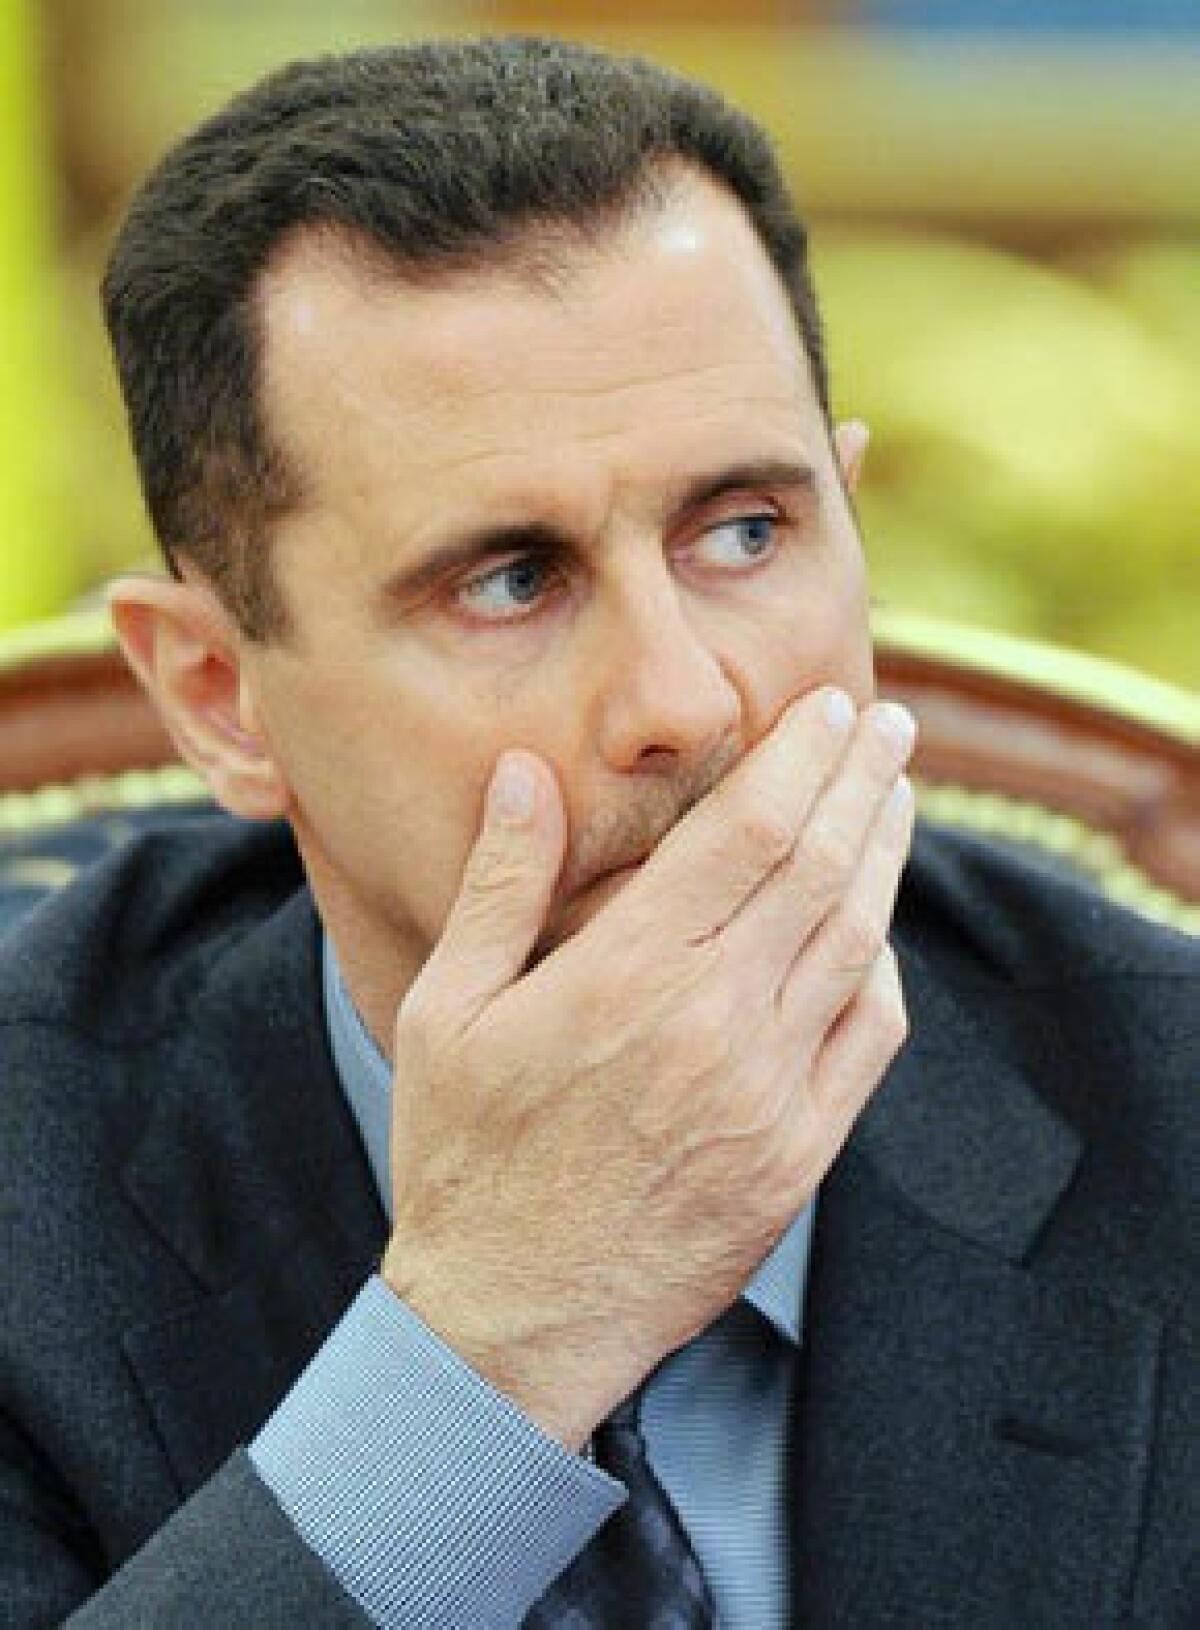 Syrian President Bashar Assad, in a rare interview with a Western newspaper, told Britain's Sunday Times that he will negotiate with rebels only if they give up their arms.